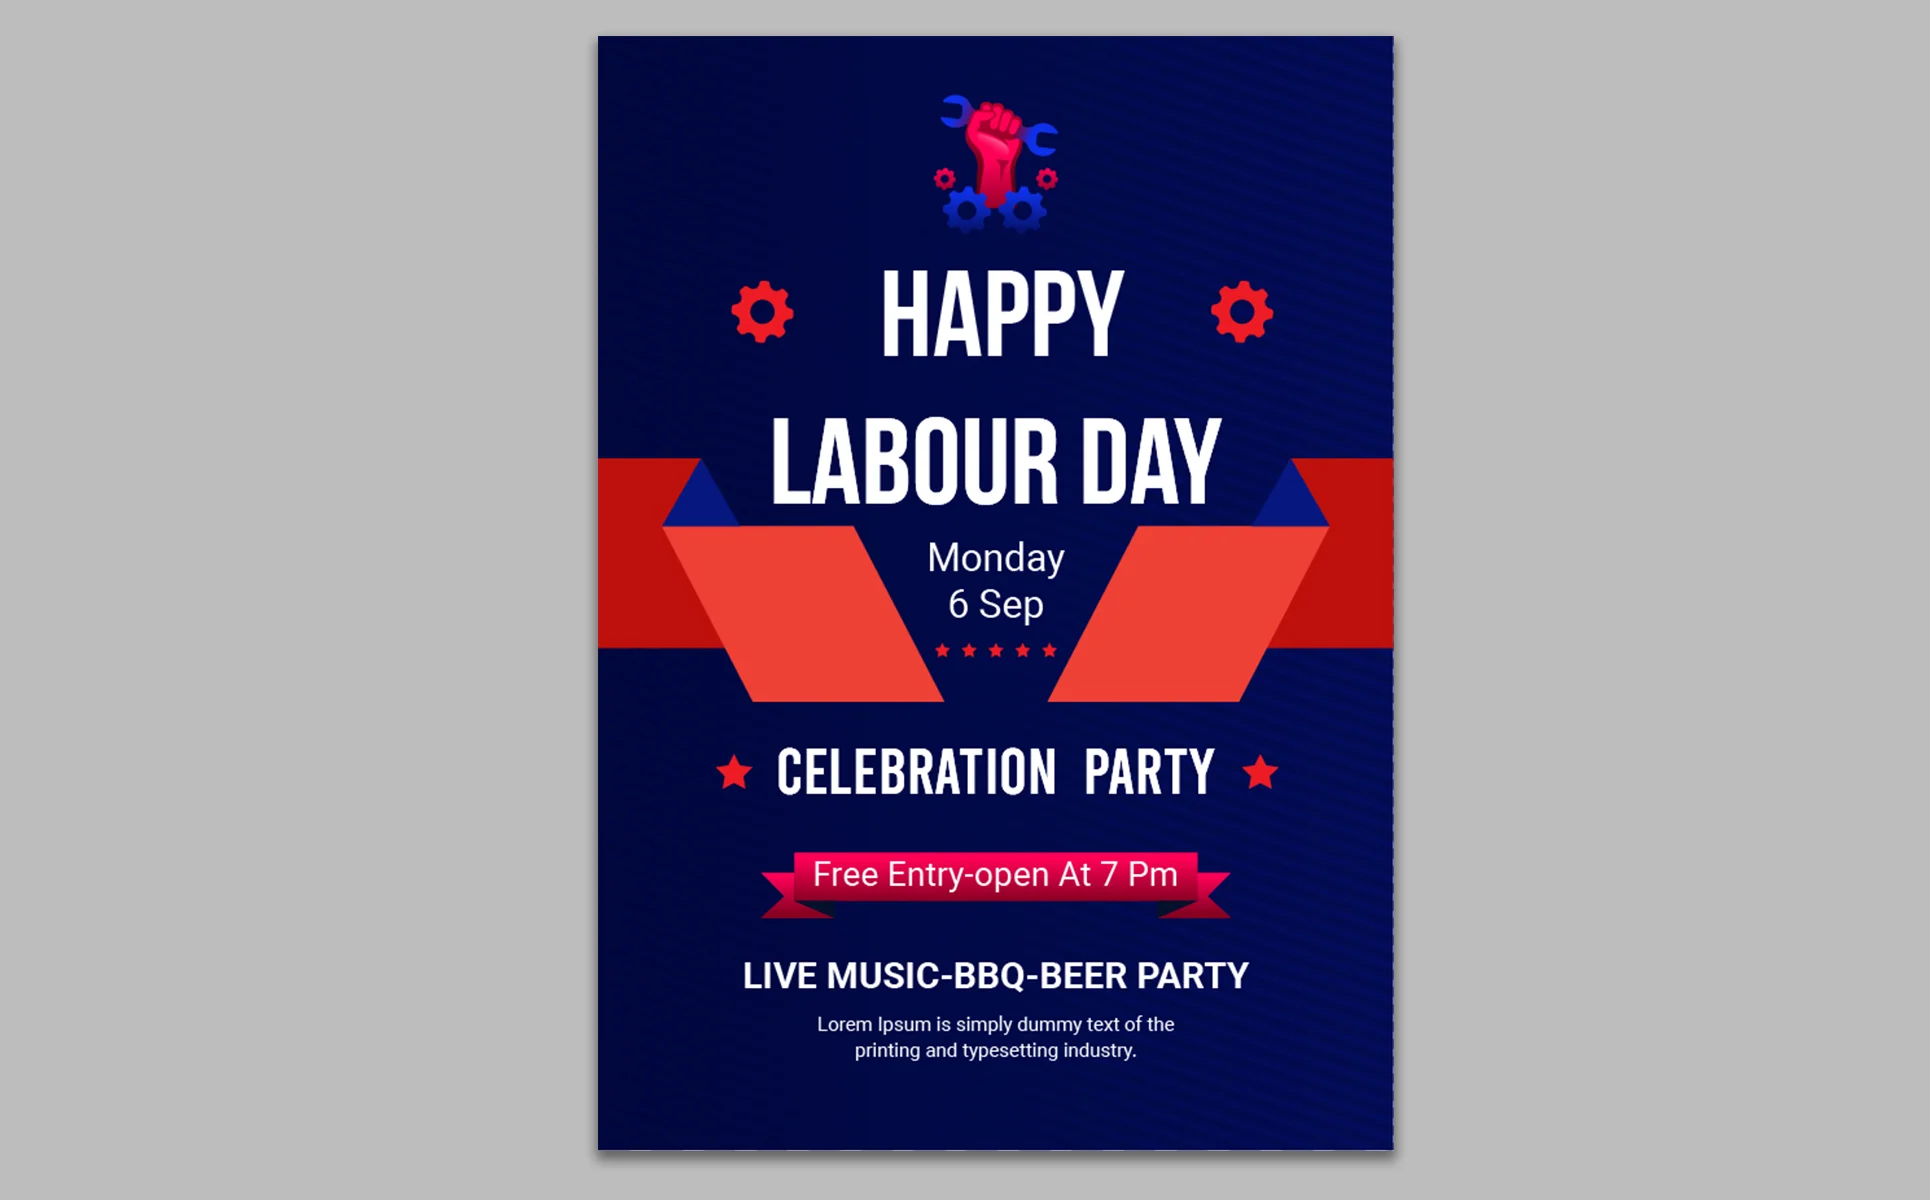 Banner for labor day advertising in blue, red and white on a gray background.